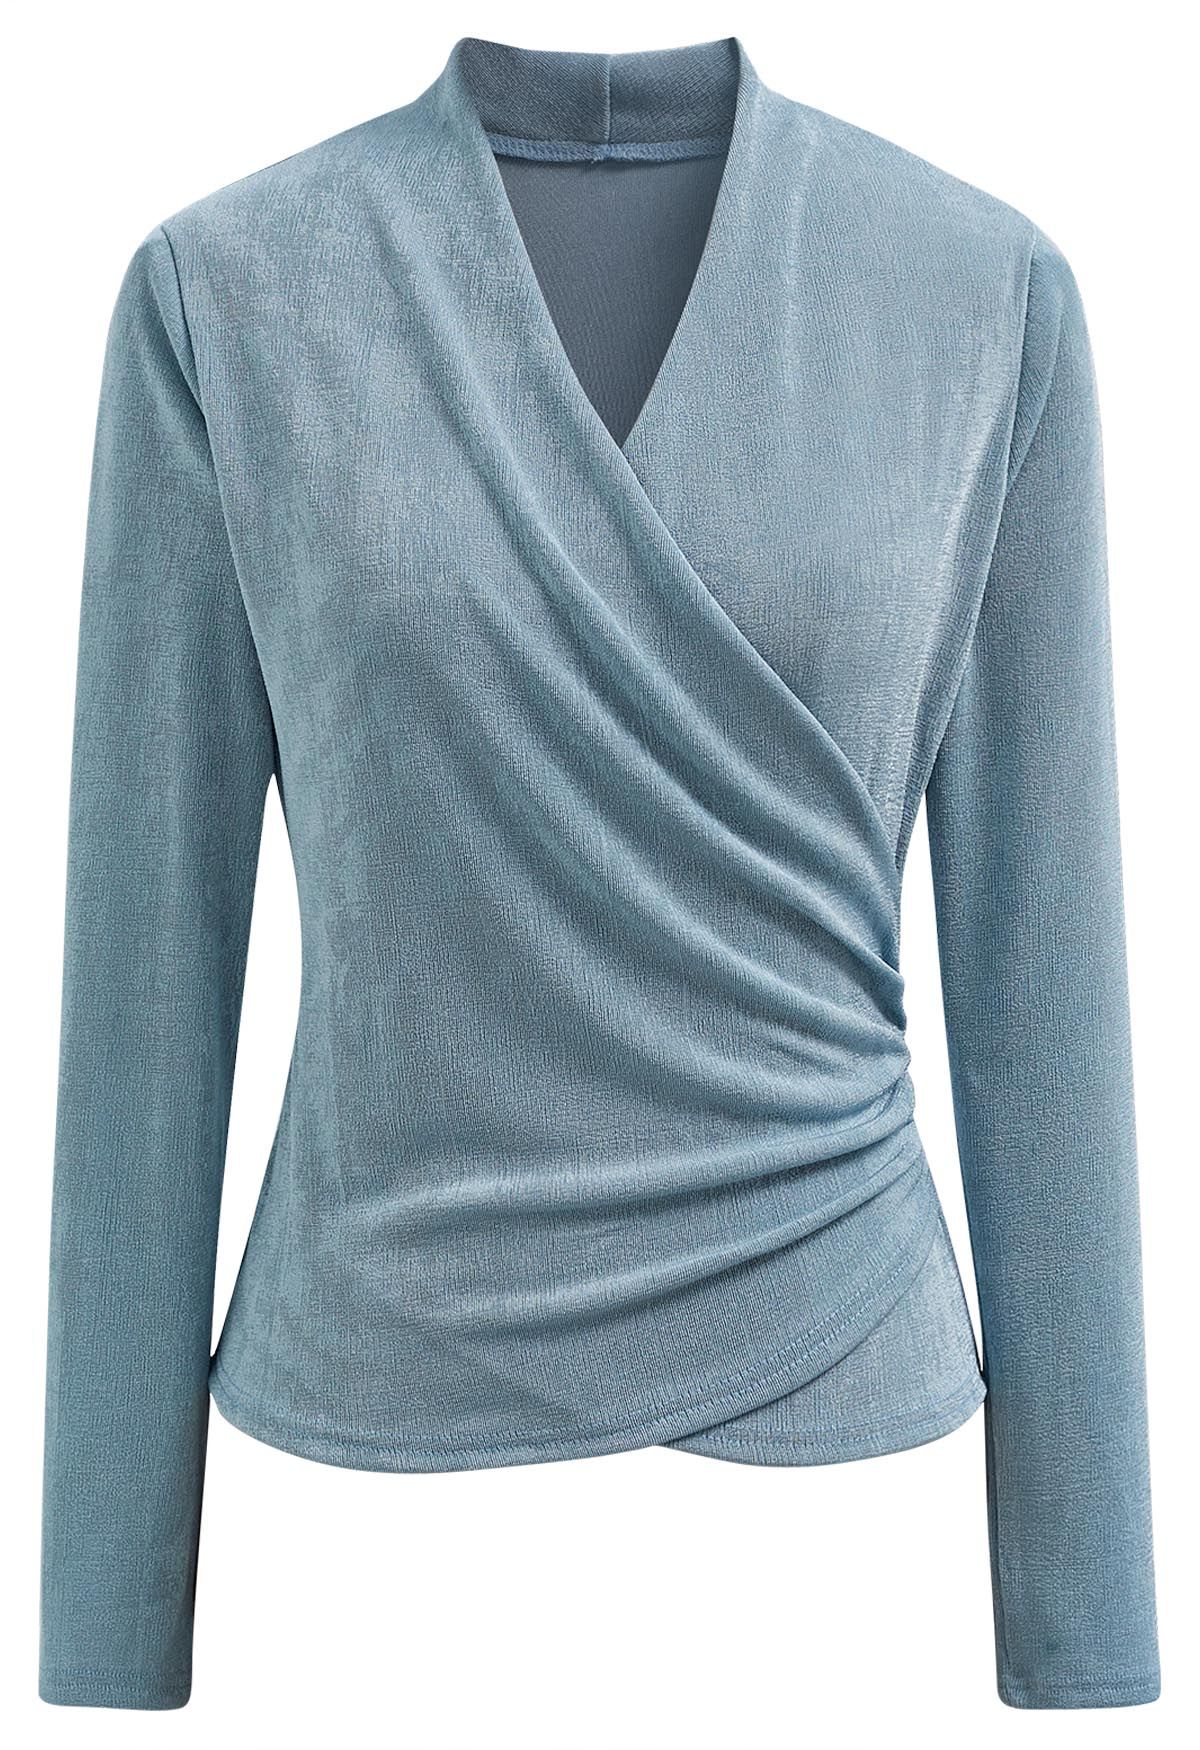 Ruched Waist Faux-Wrap Top in Dusty Blue